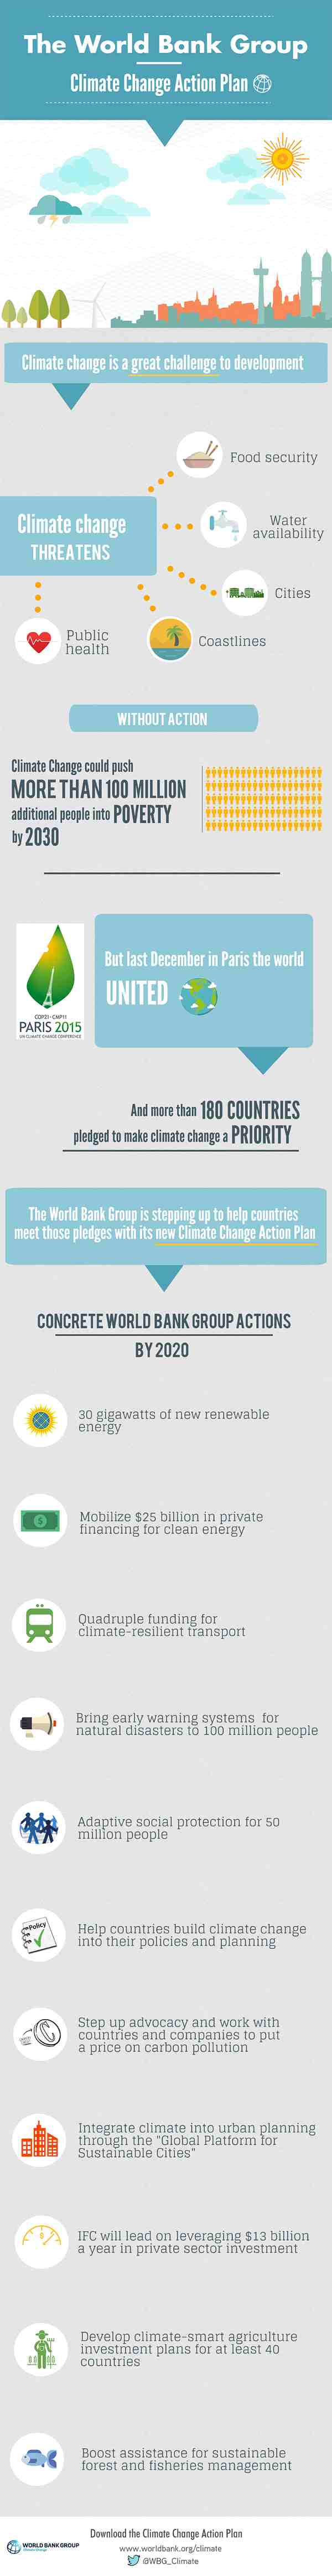 World Bank Climate Change Action Plan